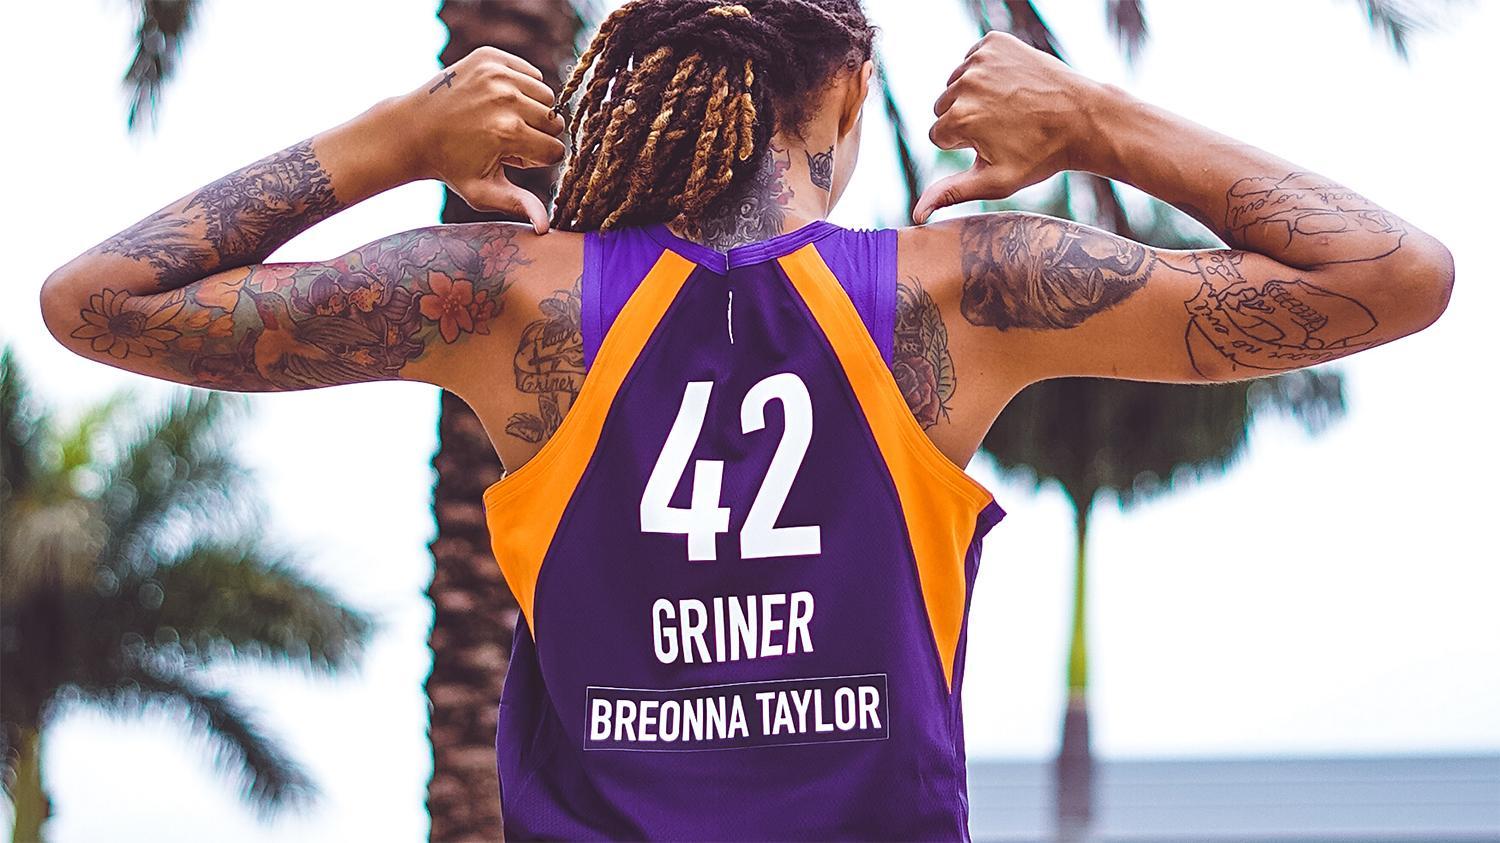 Phoenix Mercury via Cronkite News The Phoenix Mercury announced that players will display Breonna Taylor’s name on the back of their jerseys for the 2020 season.